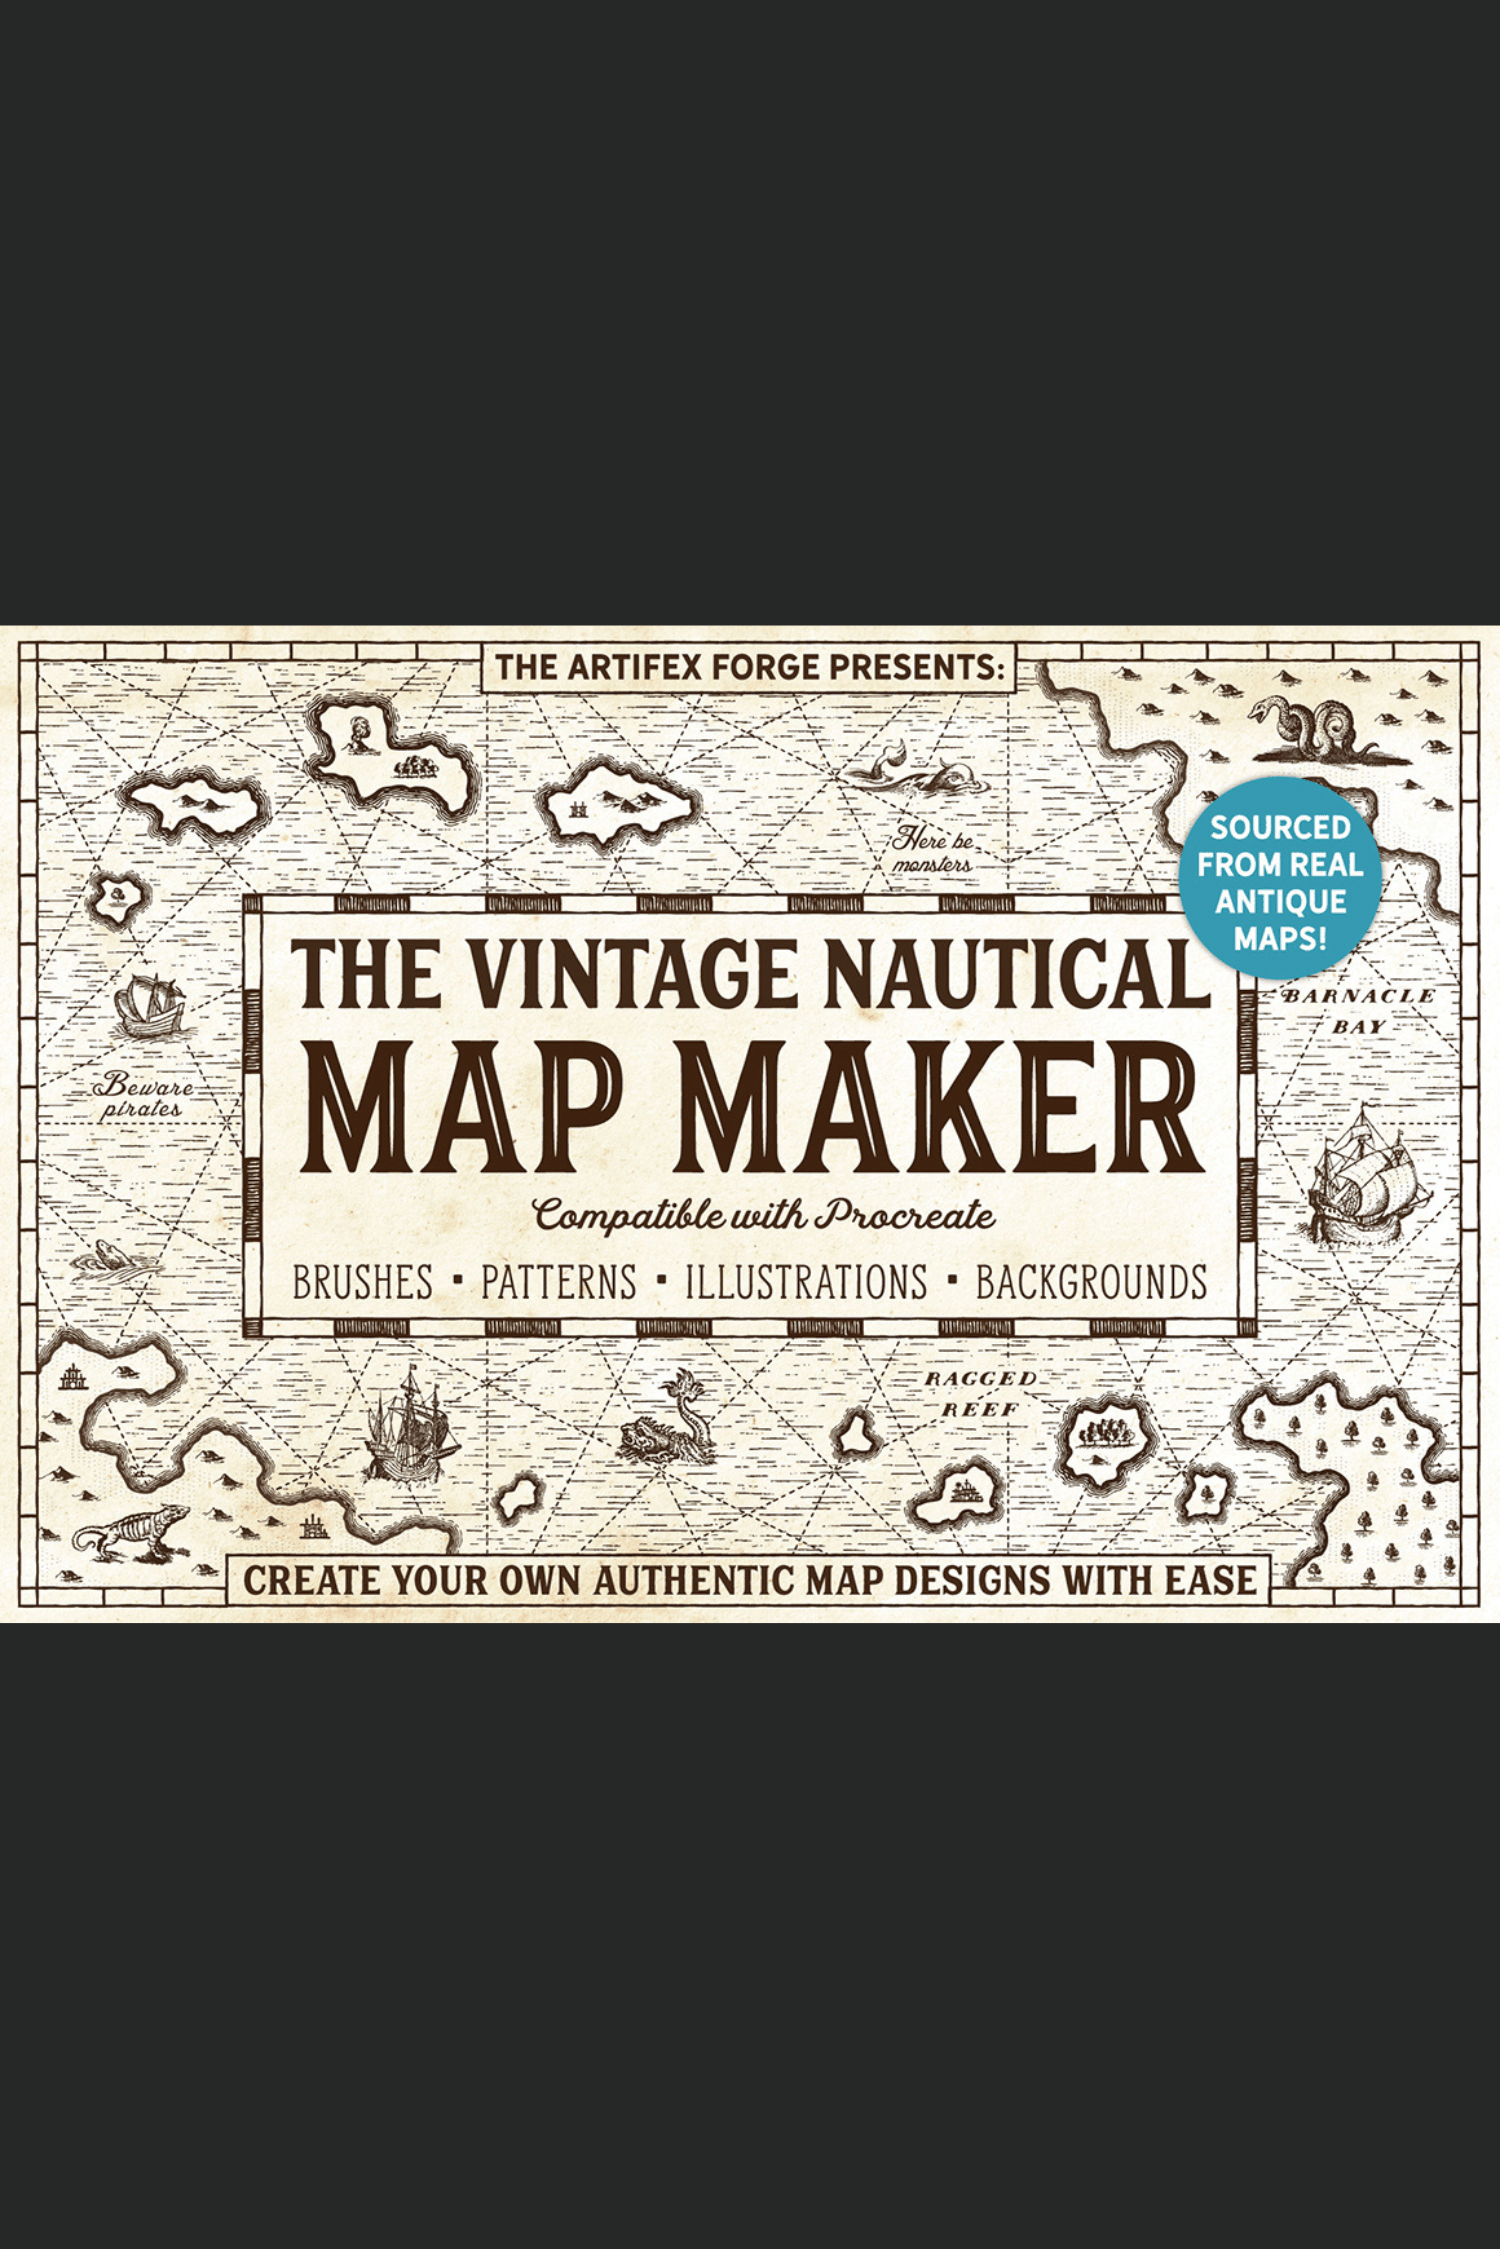 The Vintage Nautical Map Maker Toolkit by Artifex Forge